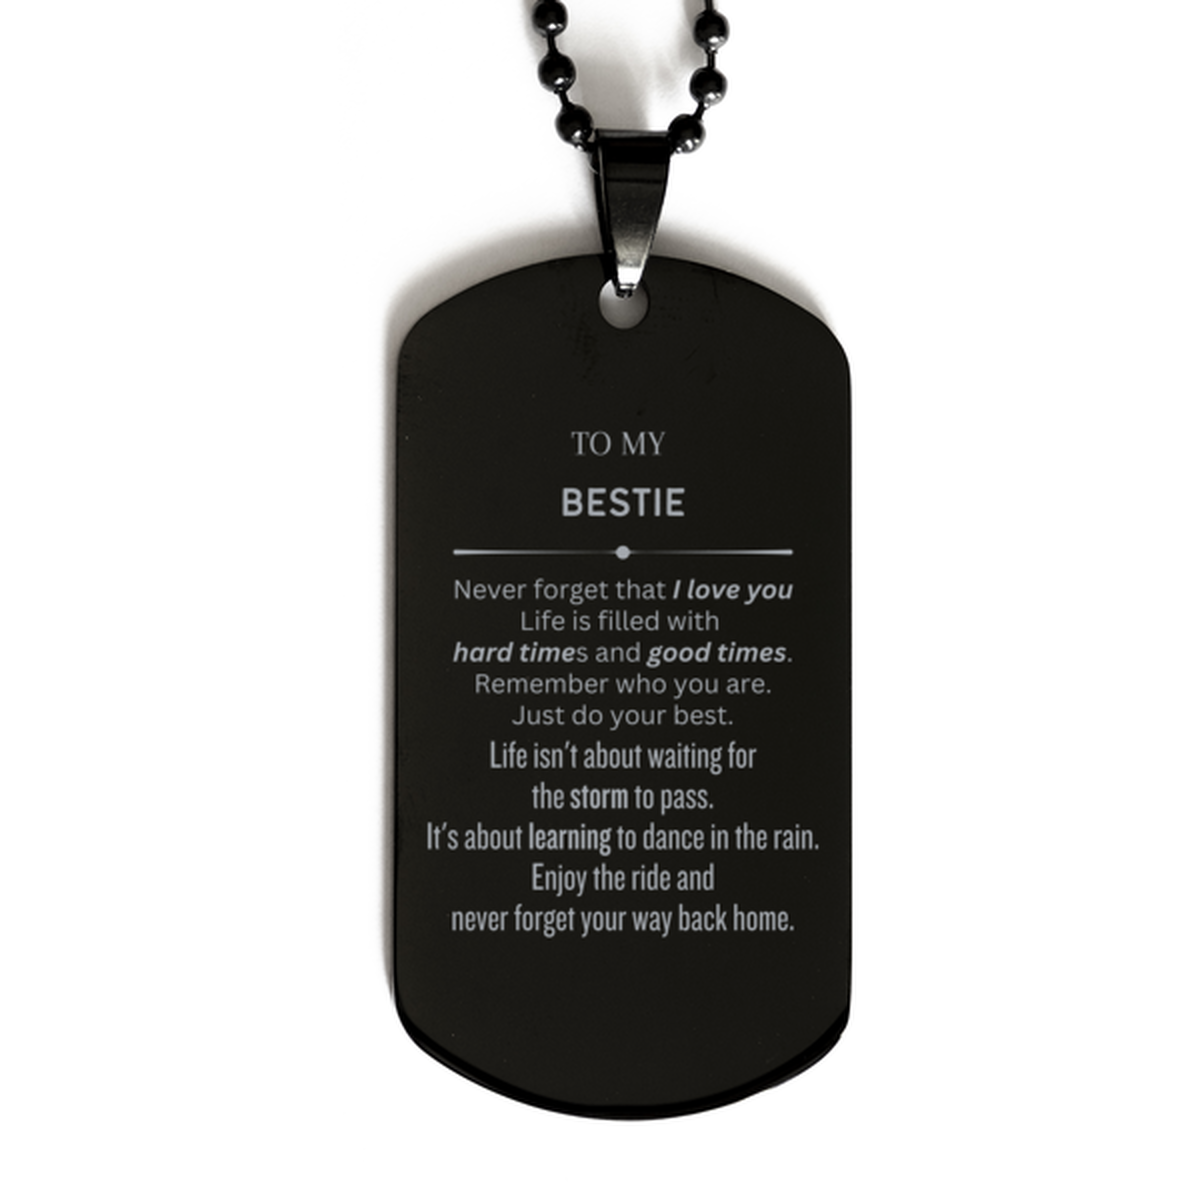 Christmas Bestie Black Dog Tag Gifts, To My Bestie Birthday Thank You Gifts For Bestie, Graduation Unique Gifts For Bestie To My Bestie Never forget that I love you life is filled with hard times and good times. Remember who you are. Just do your best